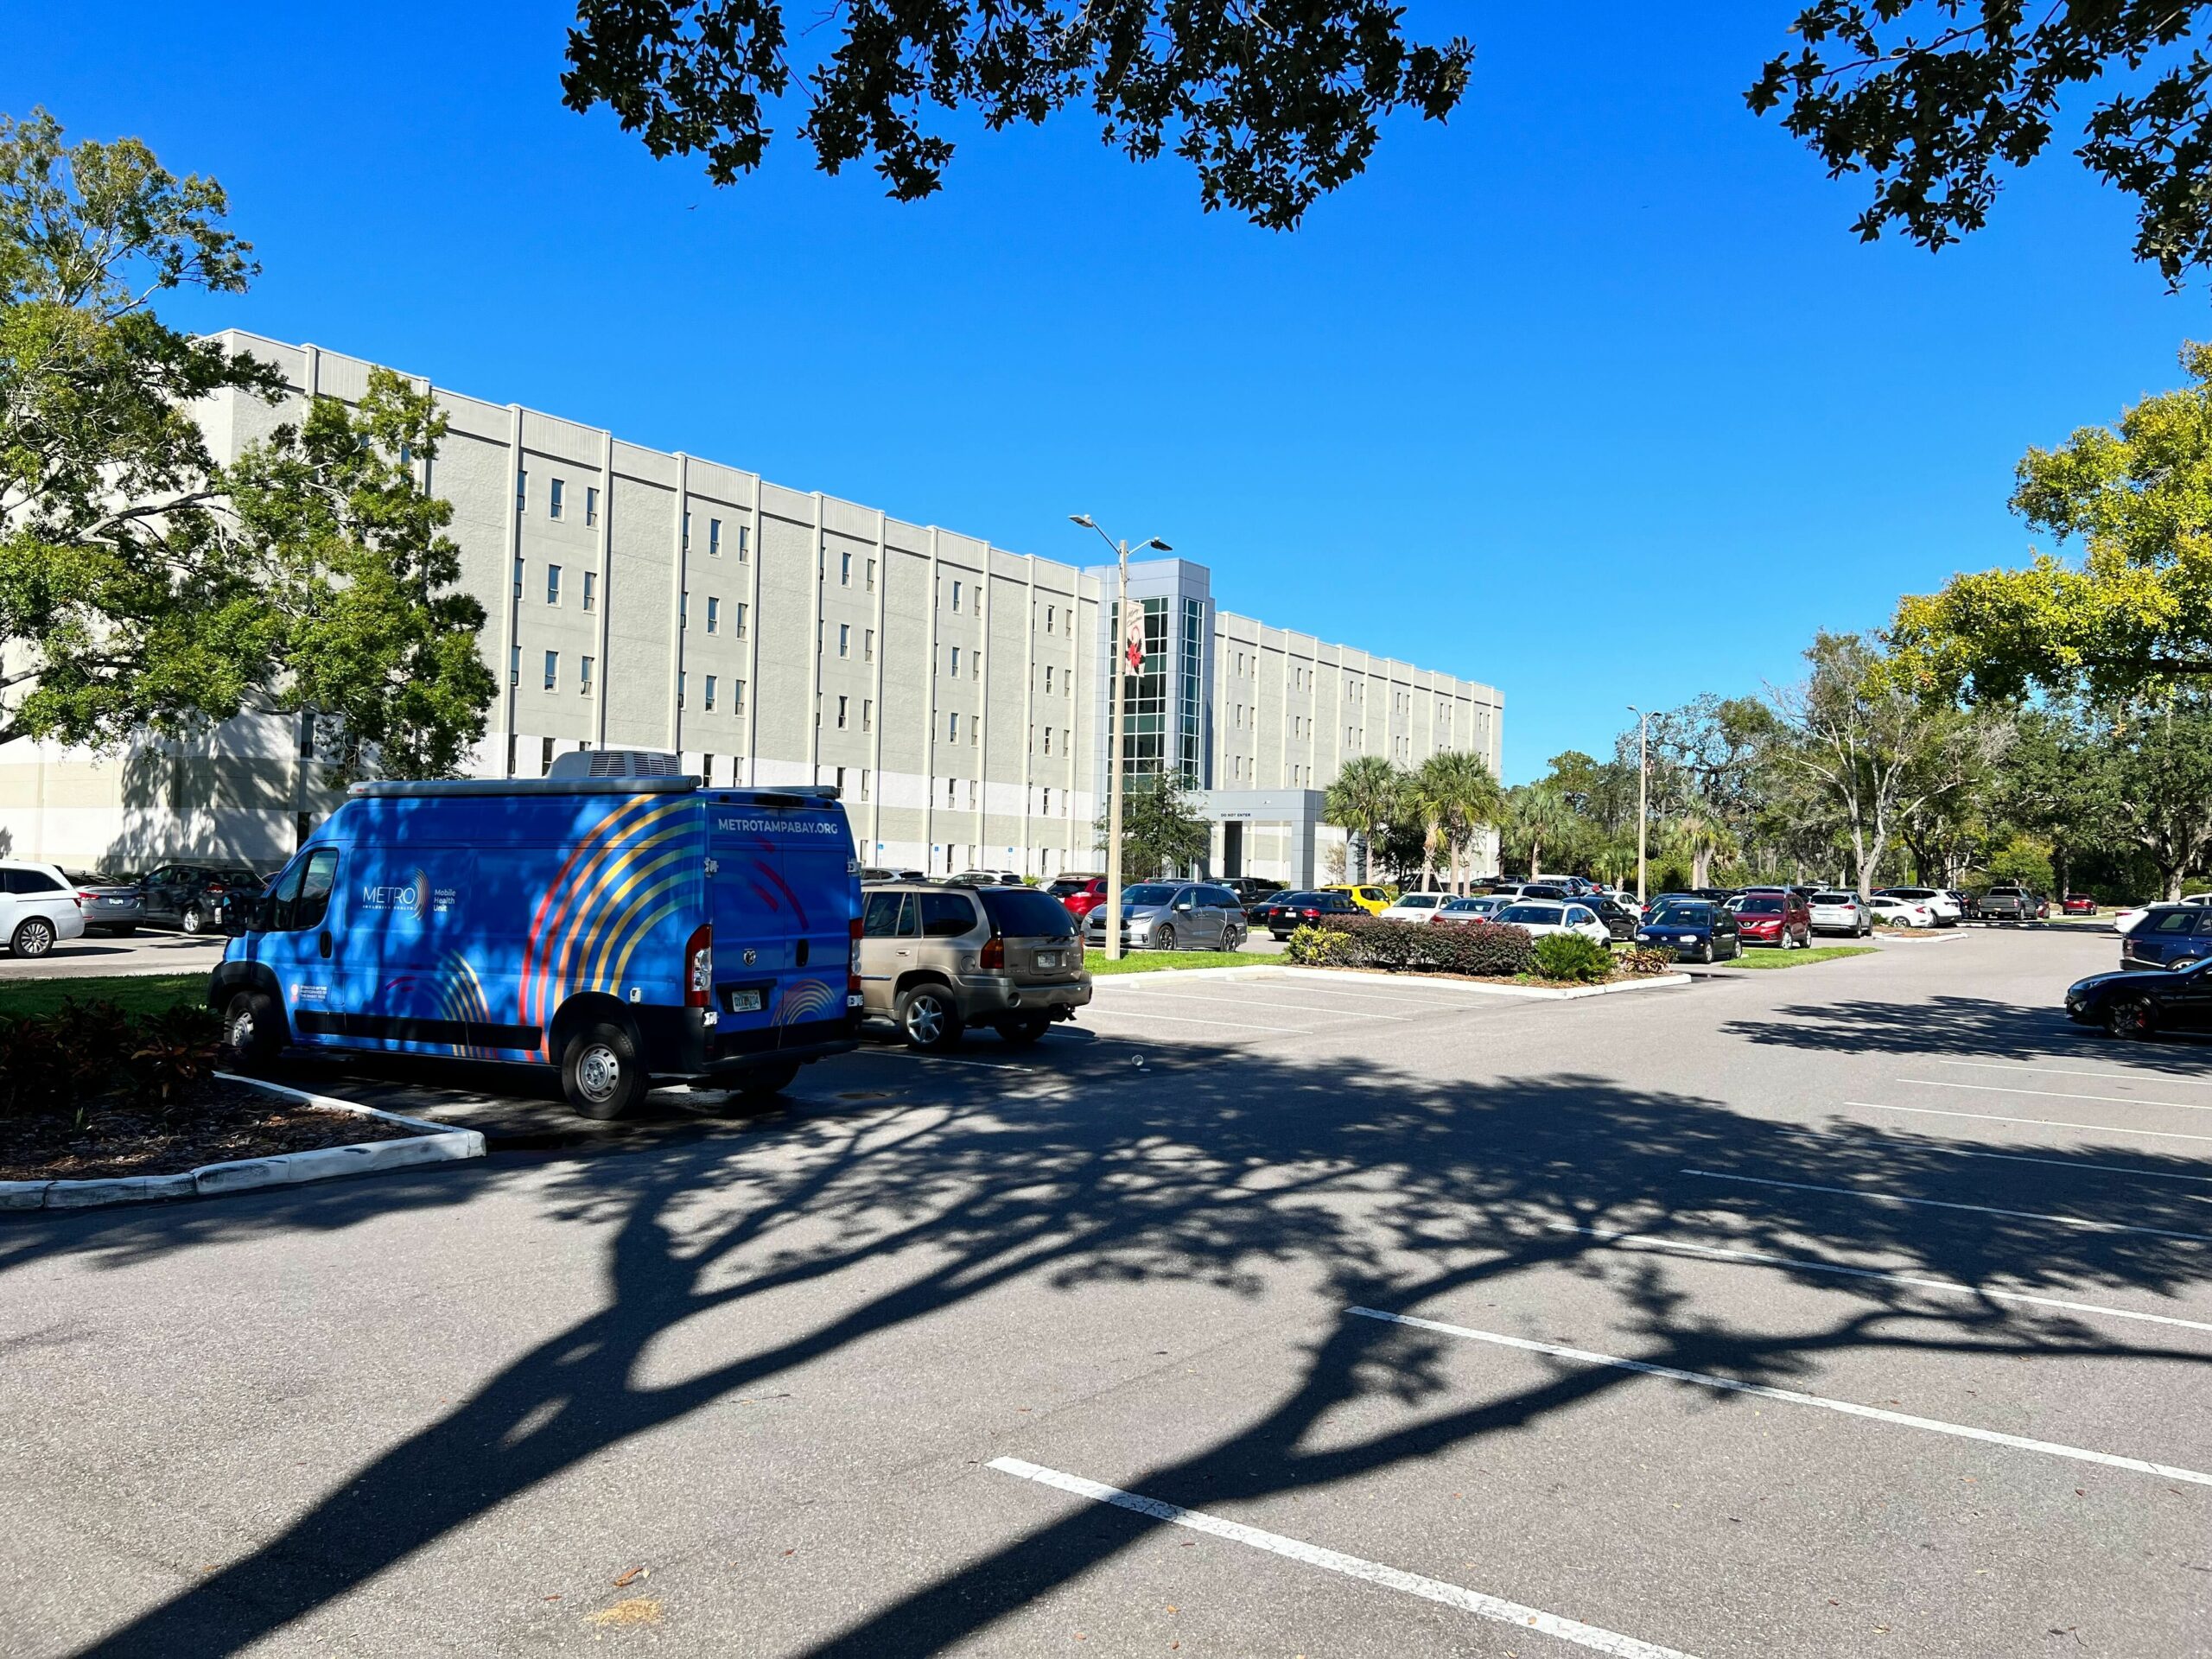 A METRO Inclusive Health branded van parked in a lot outside a multi-story medical facility on a sunny day. The van is wrapped with a colorful design featuring the METRO logo. Trees cast shadows over the parking area, creating a peaceful, suburban atmosphere.